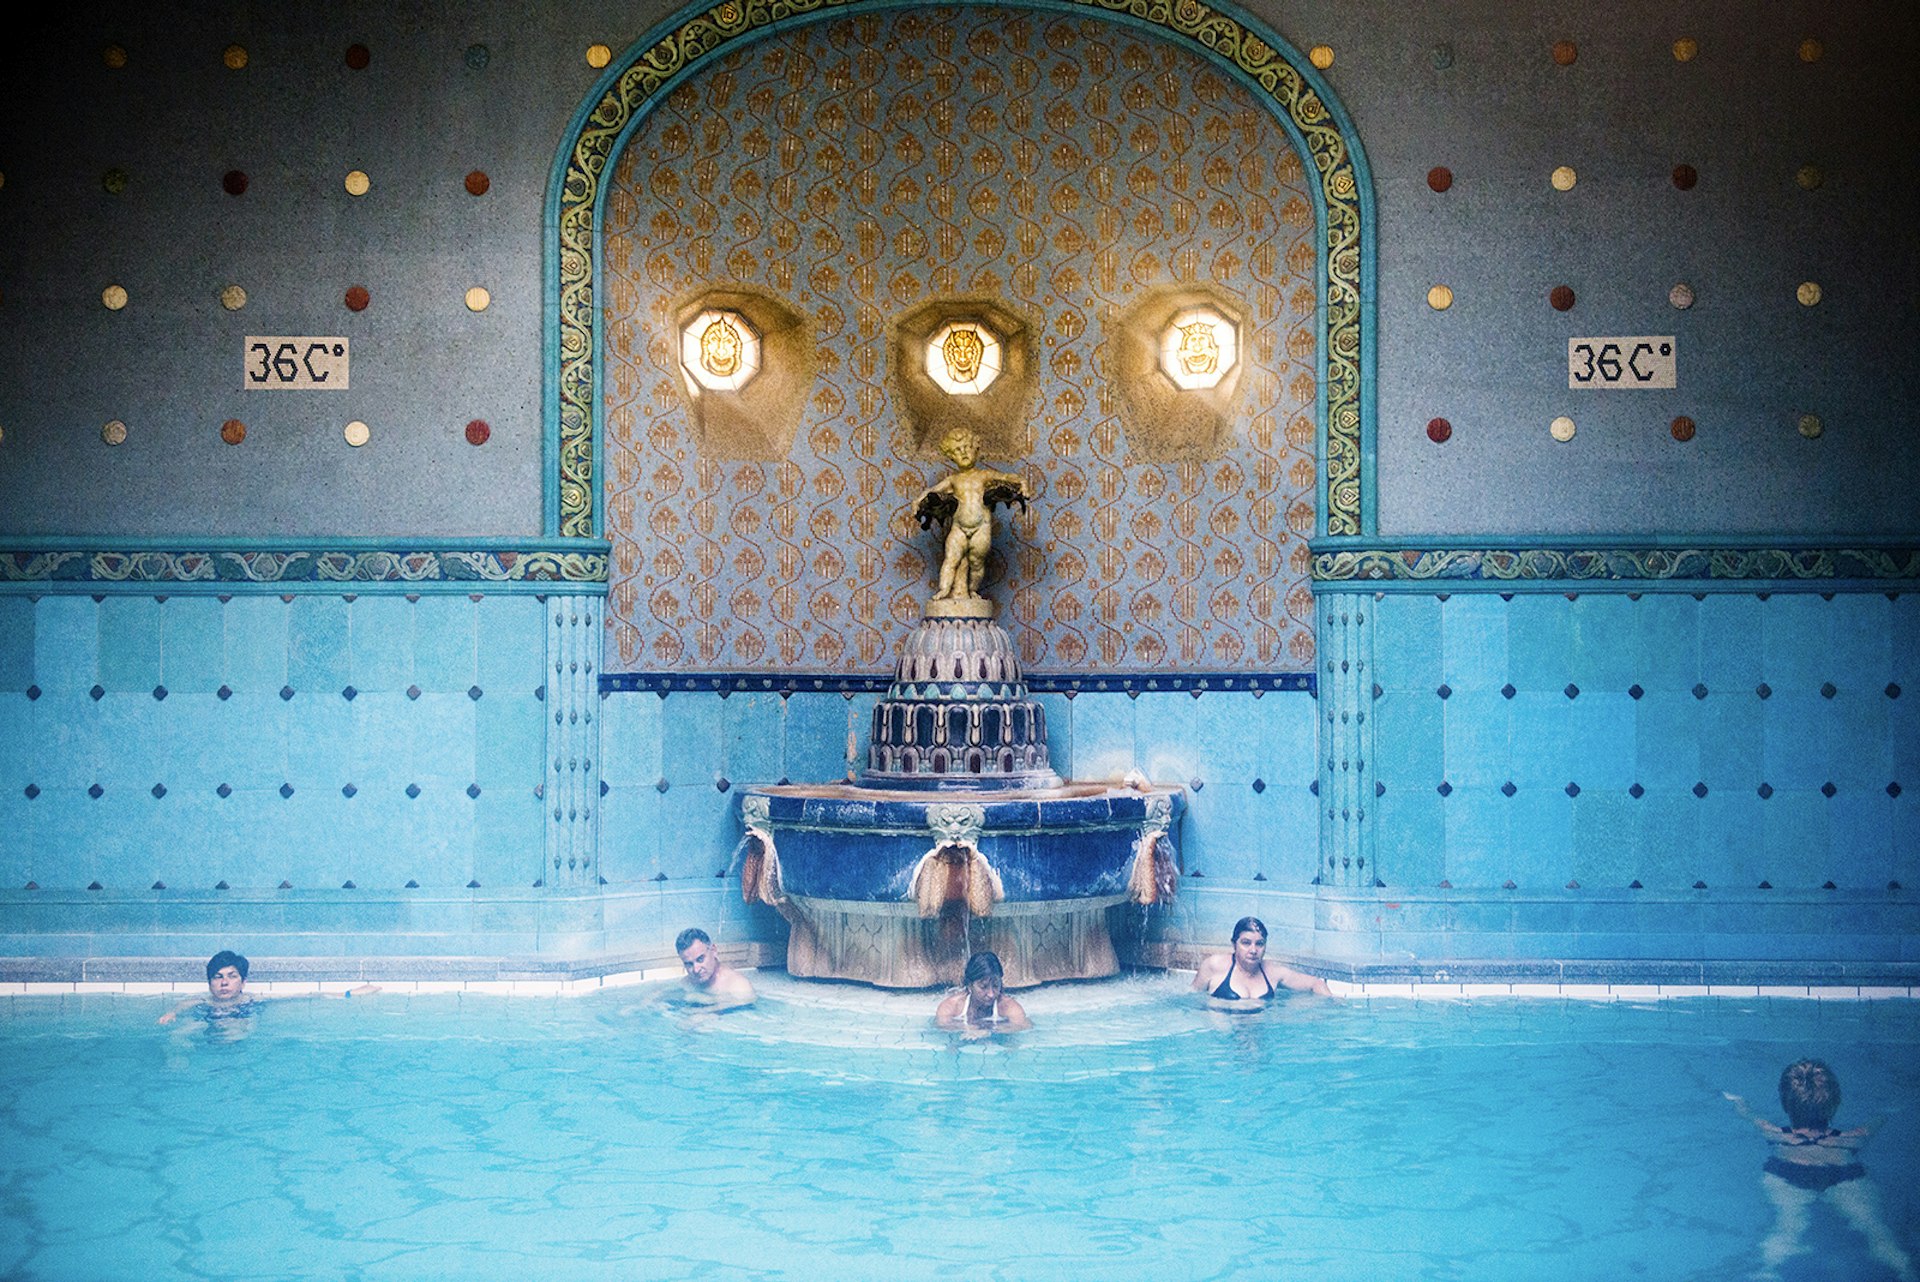 People sit in a steaming blue bath lined with blue tile next to an art nouveau fountain. A sign on the tiled wall indicates the water is 36C